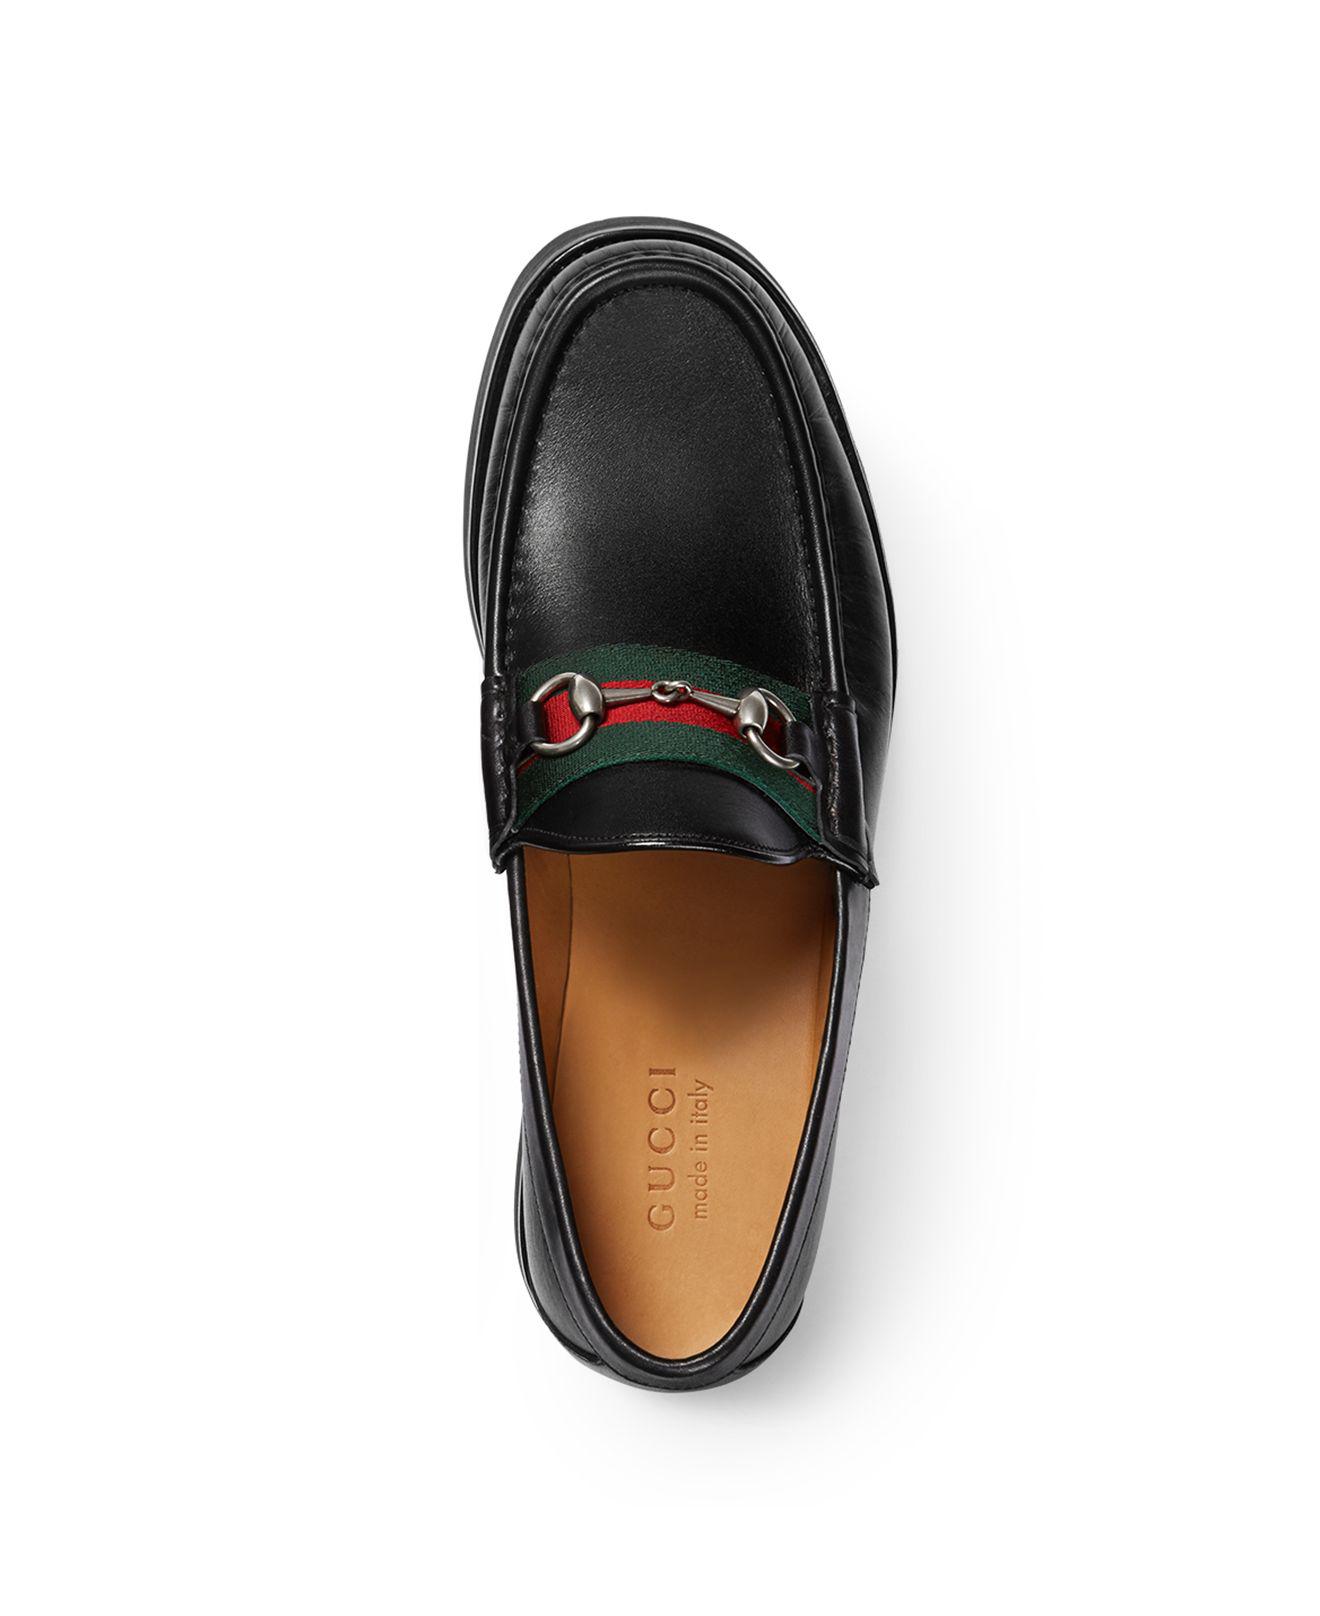 Gucci Men's Lug Sole Loafers in Black - Lyst